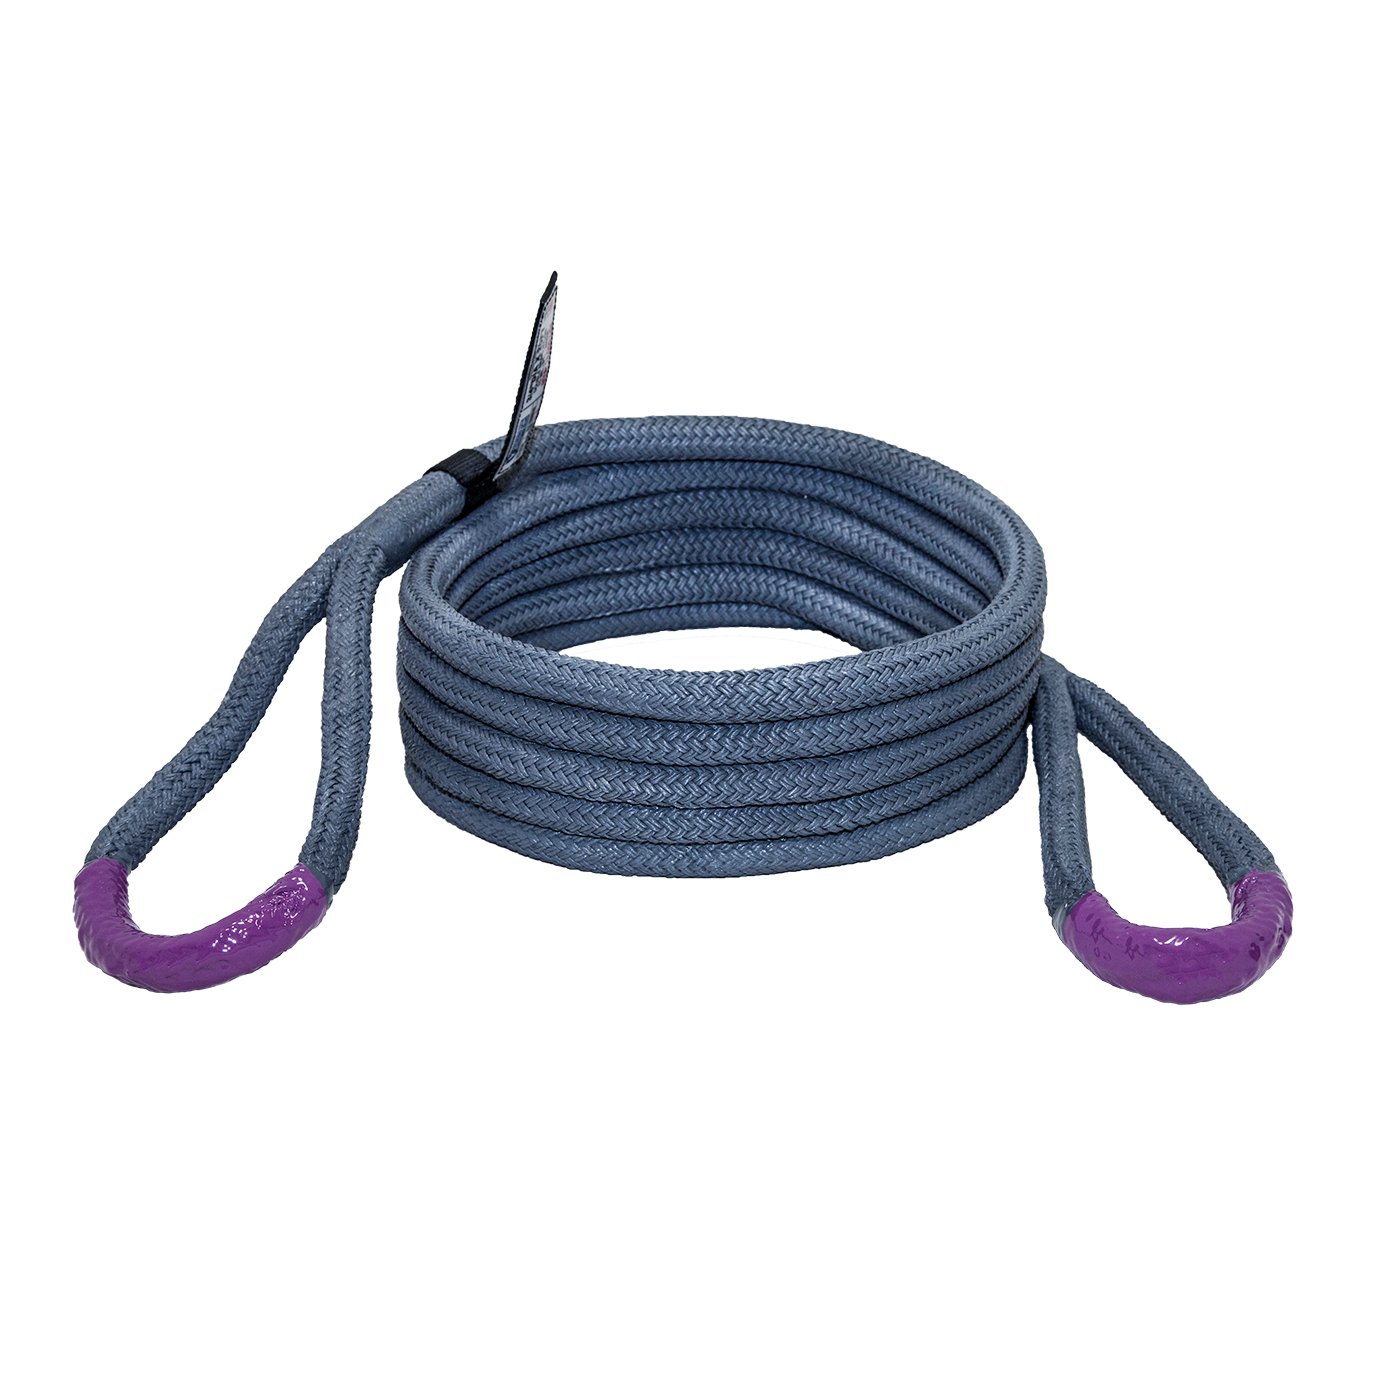 Kinetic Recovery Rope, 3/4 in. Diameter, 19,000 Psi Rating, 20 Feet Long